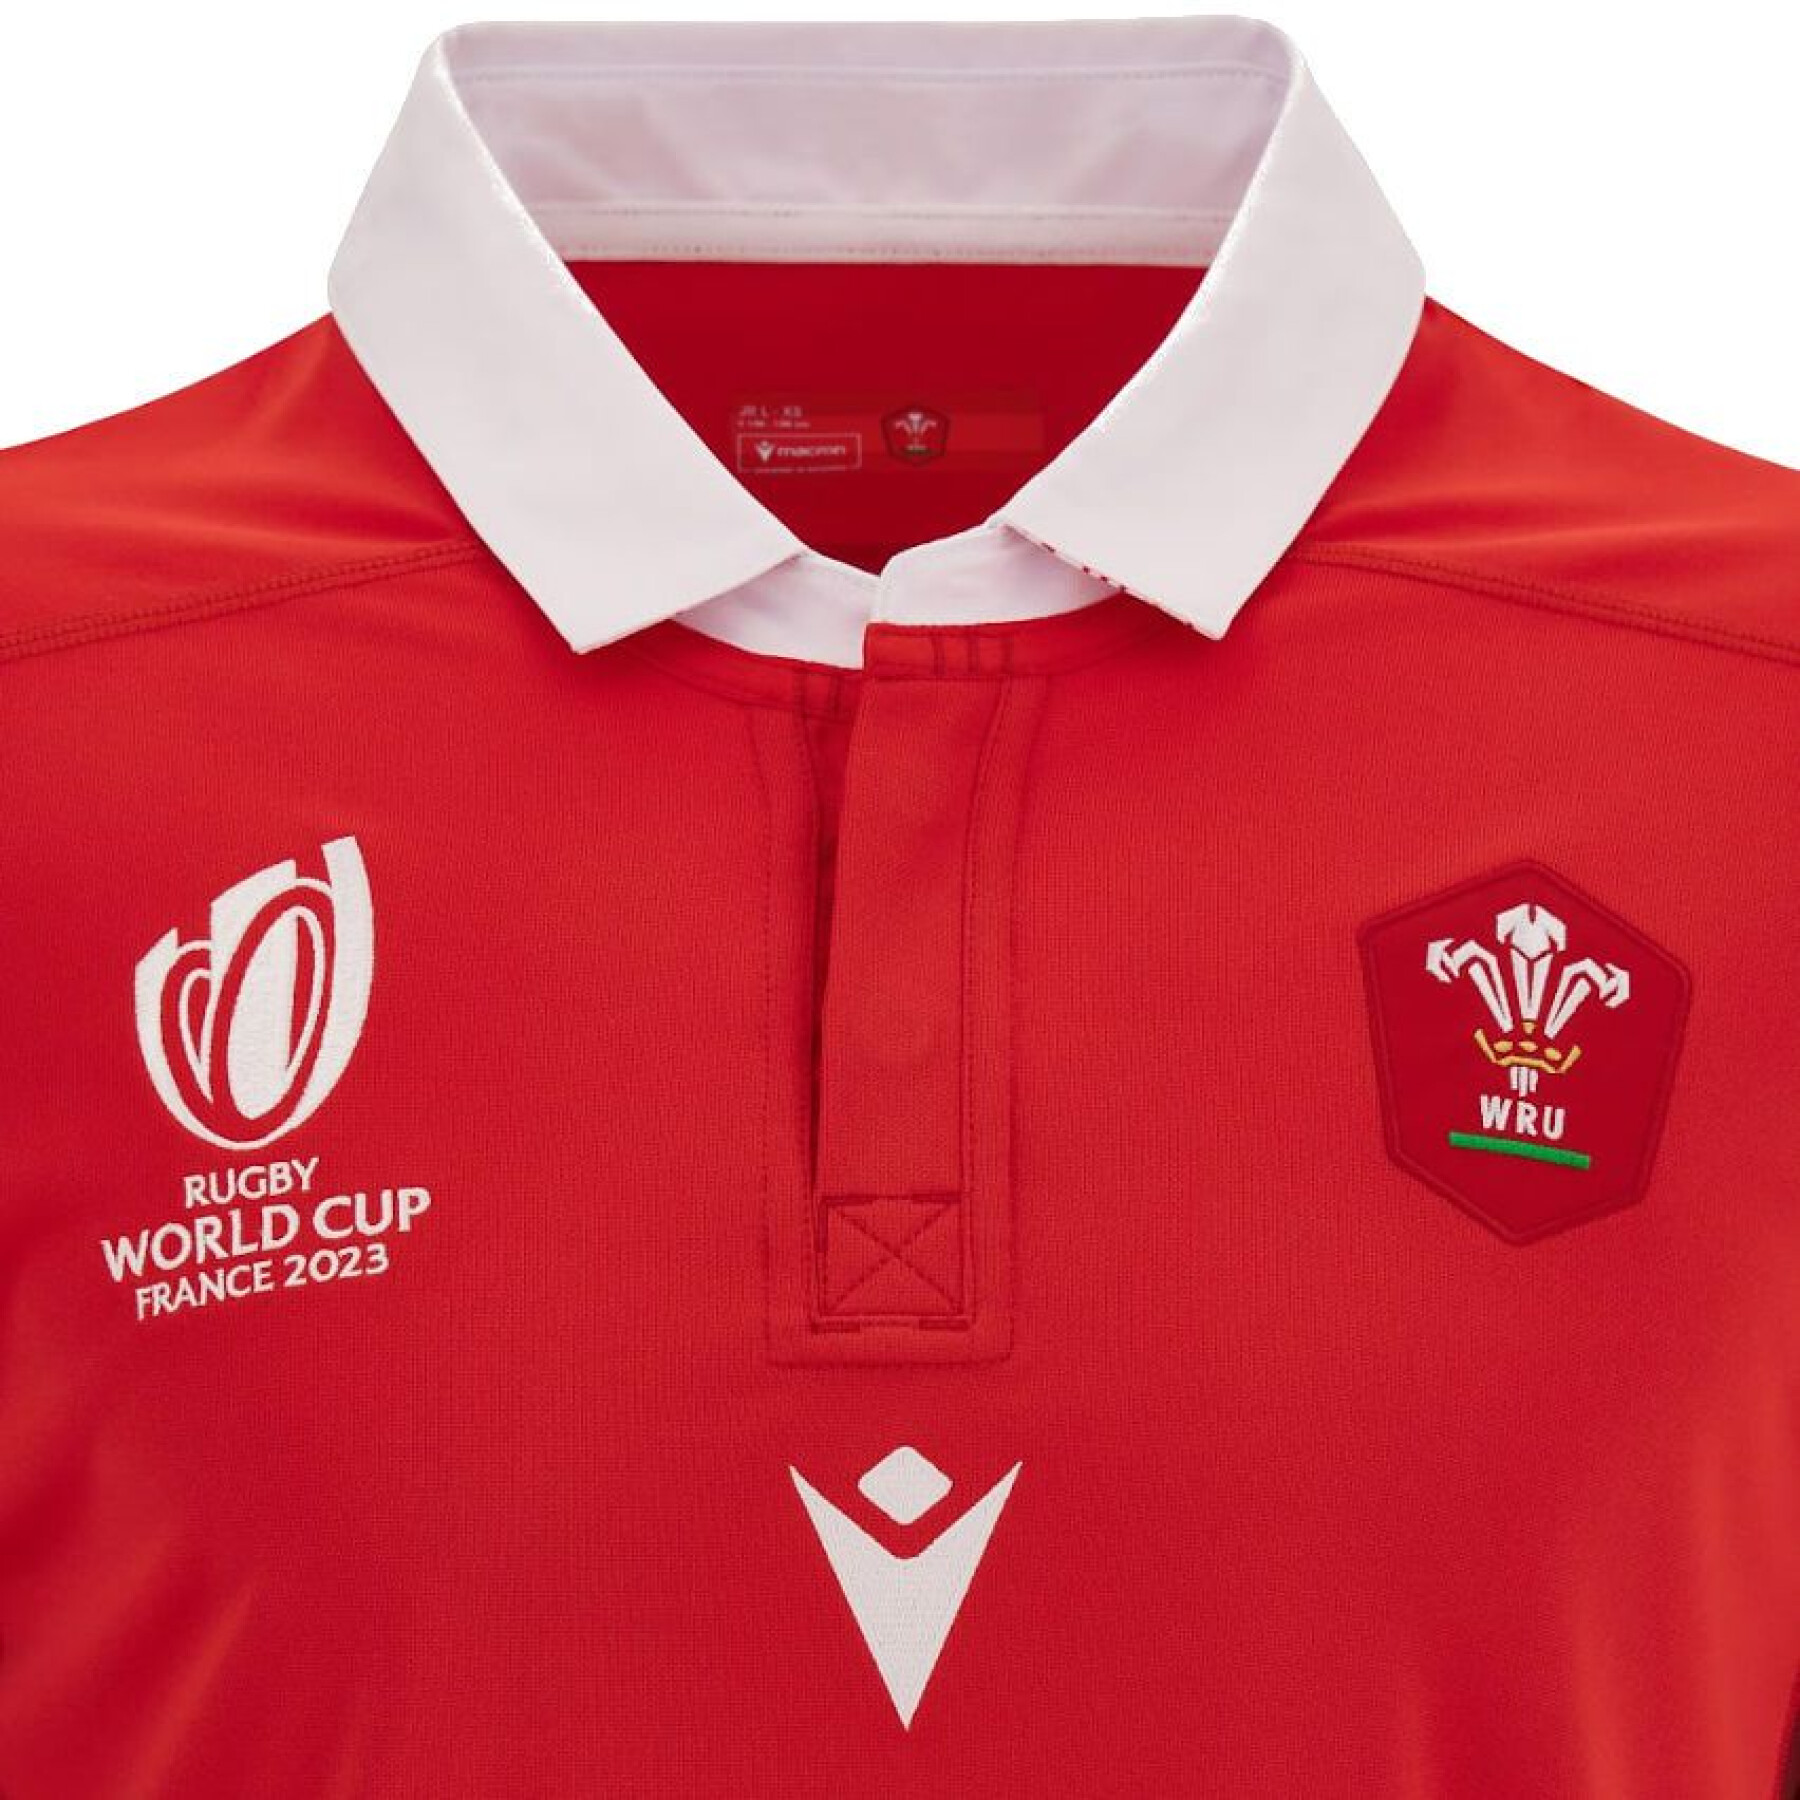 Rugby World Cup 2023 Kinder Thuisshirt Pays de Galles